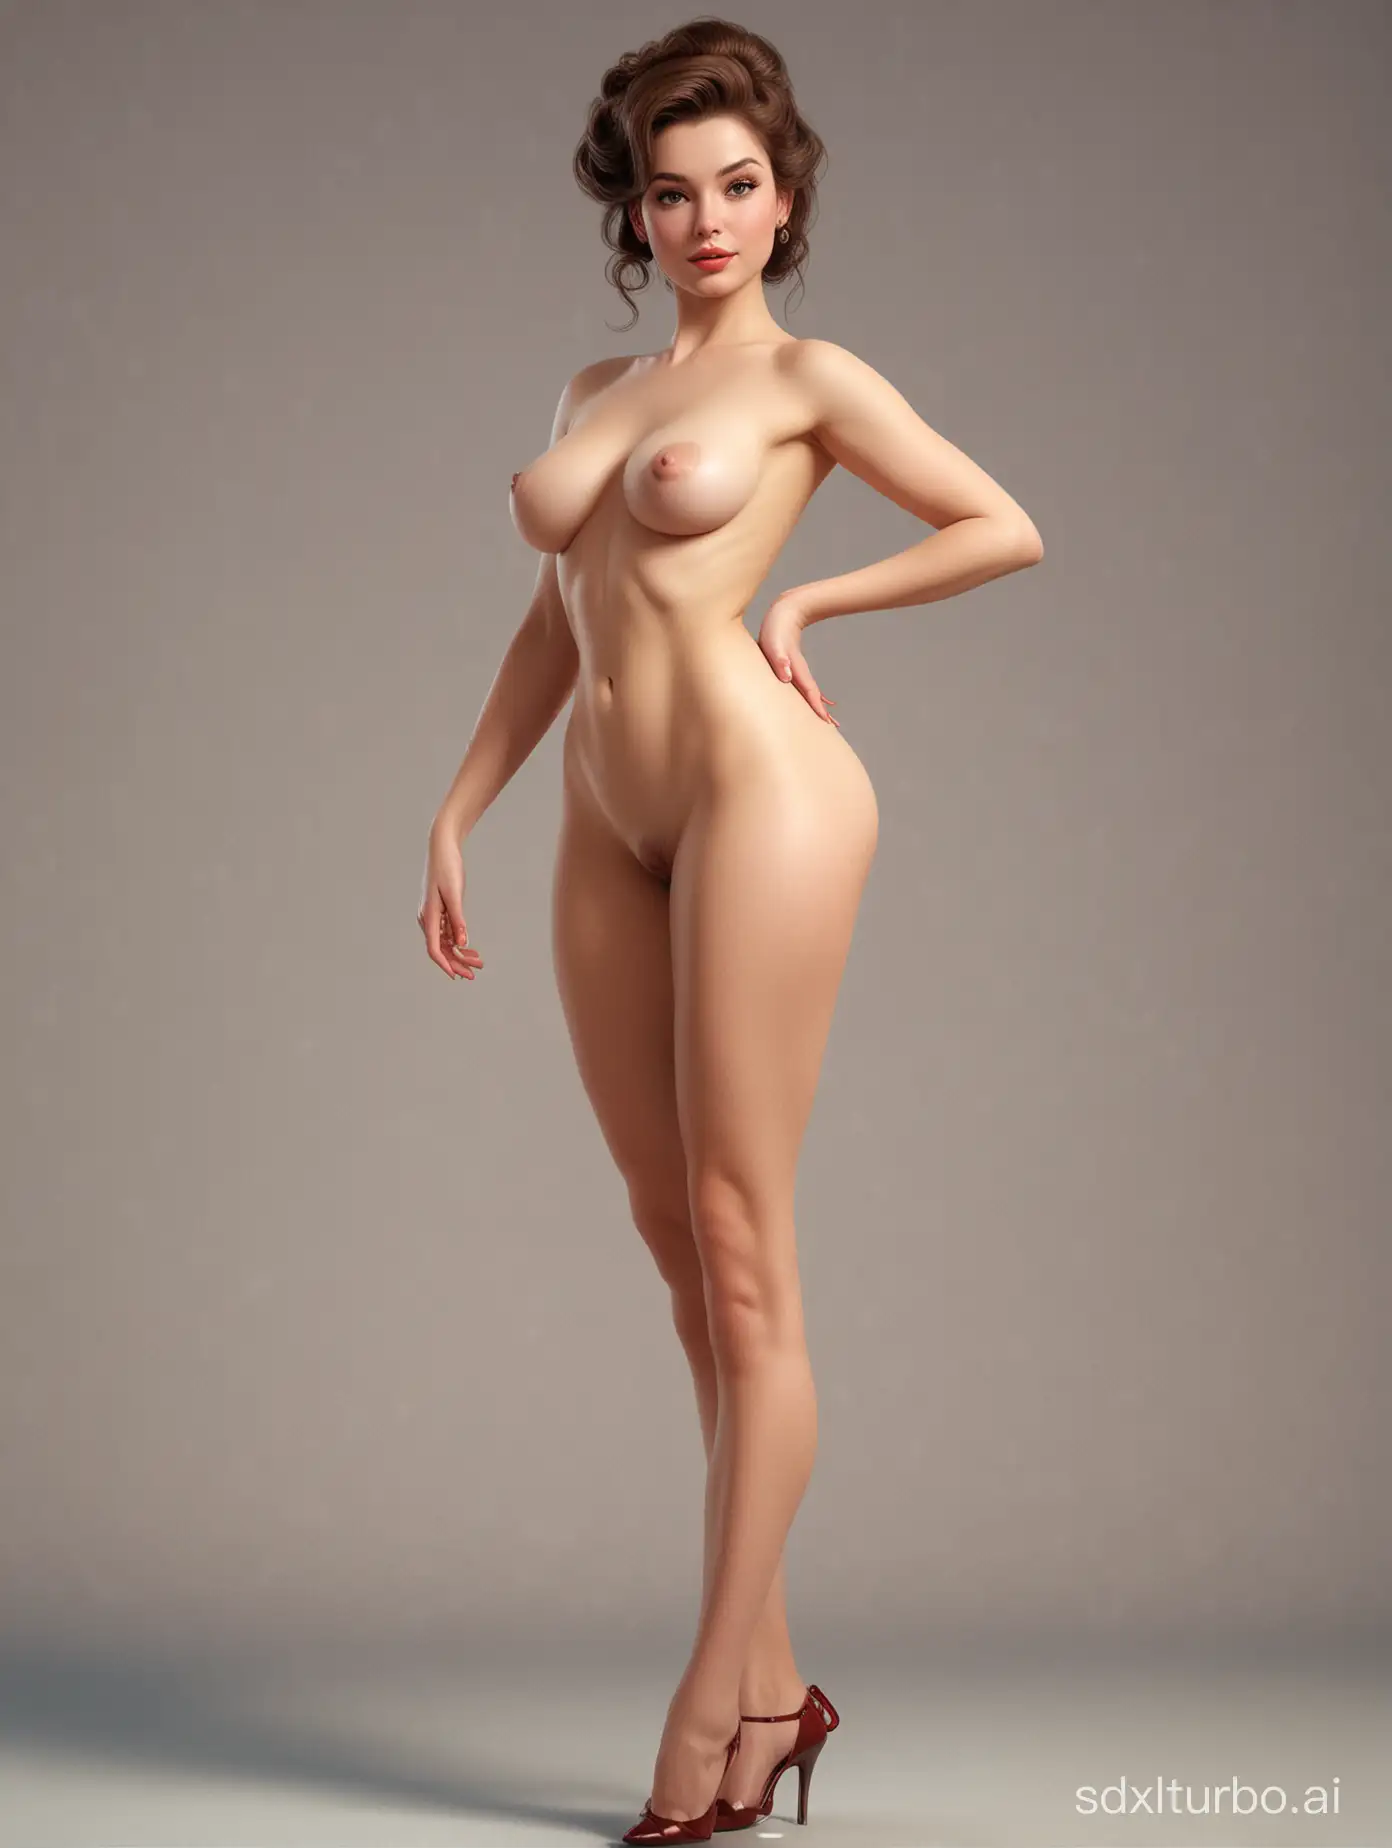 Ultra-Realistic-Digital-Painting-of-a-Cute-Naked-Girl-Inspired-by-Gil-Elvgren